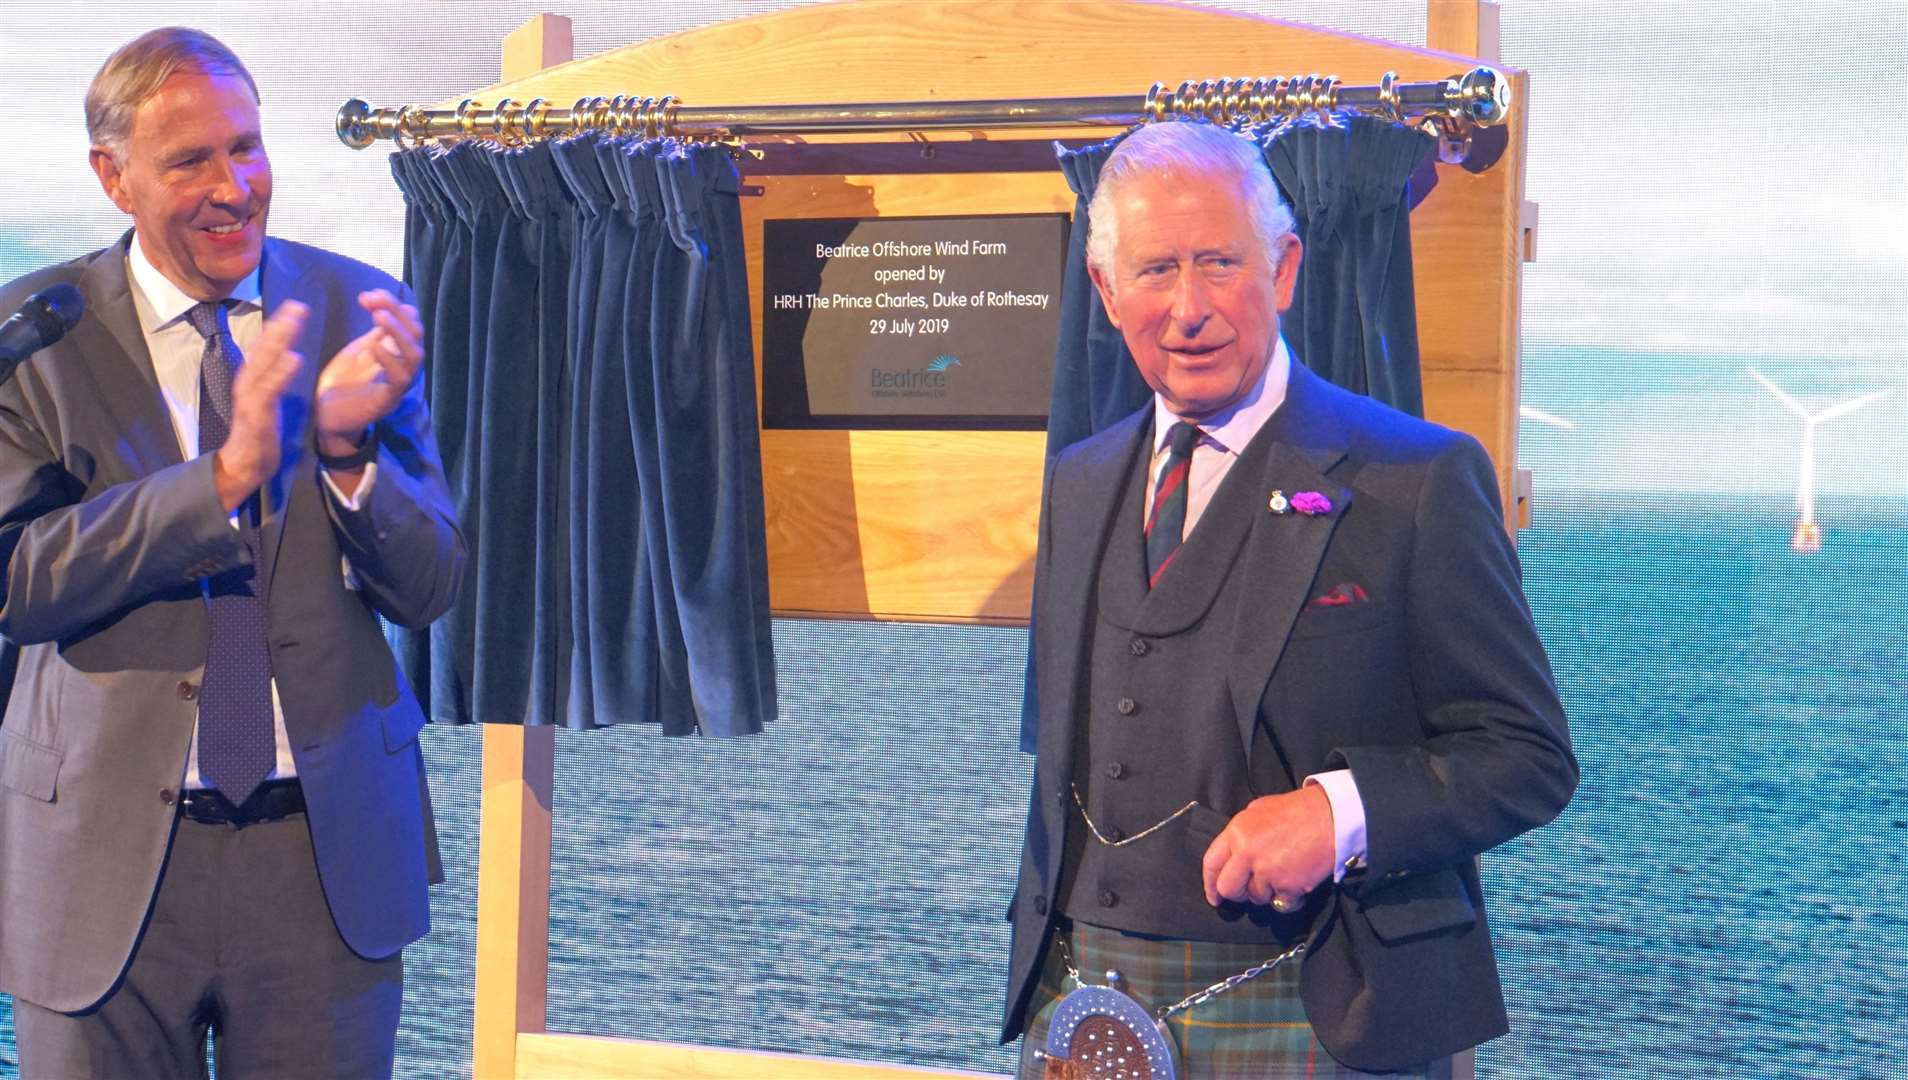 After a short speech Prince Charles unveiled a plaque to mark the official opening of the Beatrice offshore wind farm. Picture: DGS